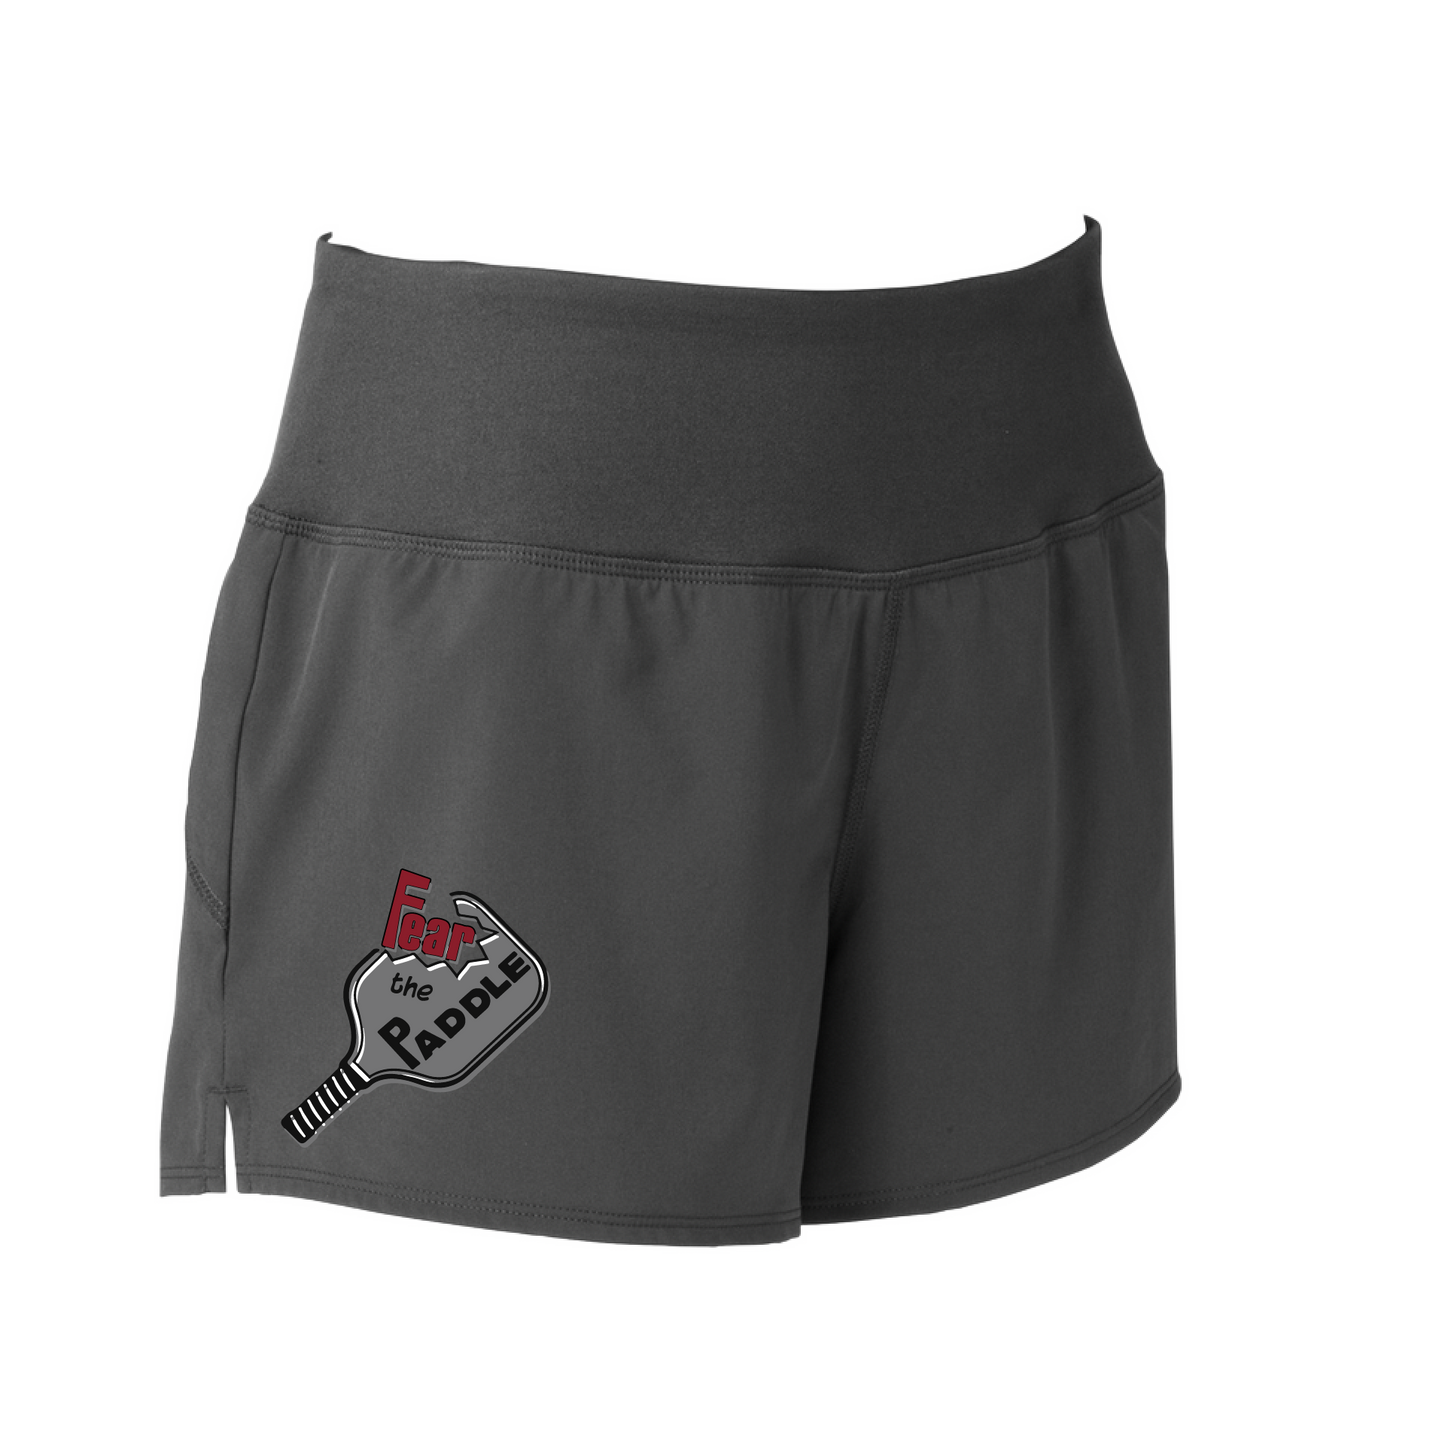 Shorts Pickleball Design: Fear the Paddle  Sport Tek women’s repeat shorts come with built-in cell phone pocket on the exterior of the waistband. You can also feel secure knowing that no matter how strenuous the exercise, the shorts will remain in place (it won’t ride up!). These shorts are extremely versatile and trendy. Transition from the Pickleball court to running errands smoothly.